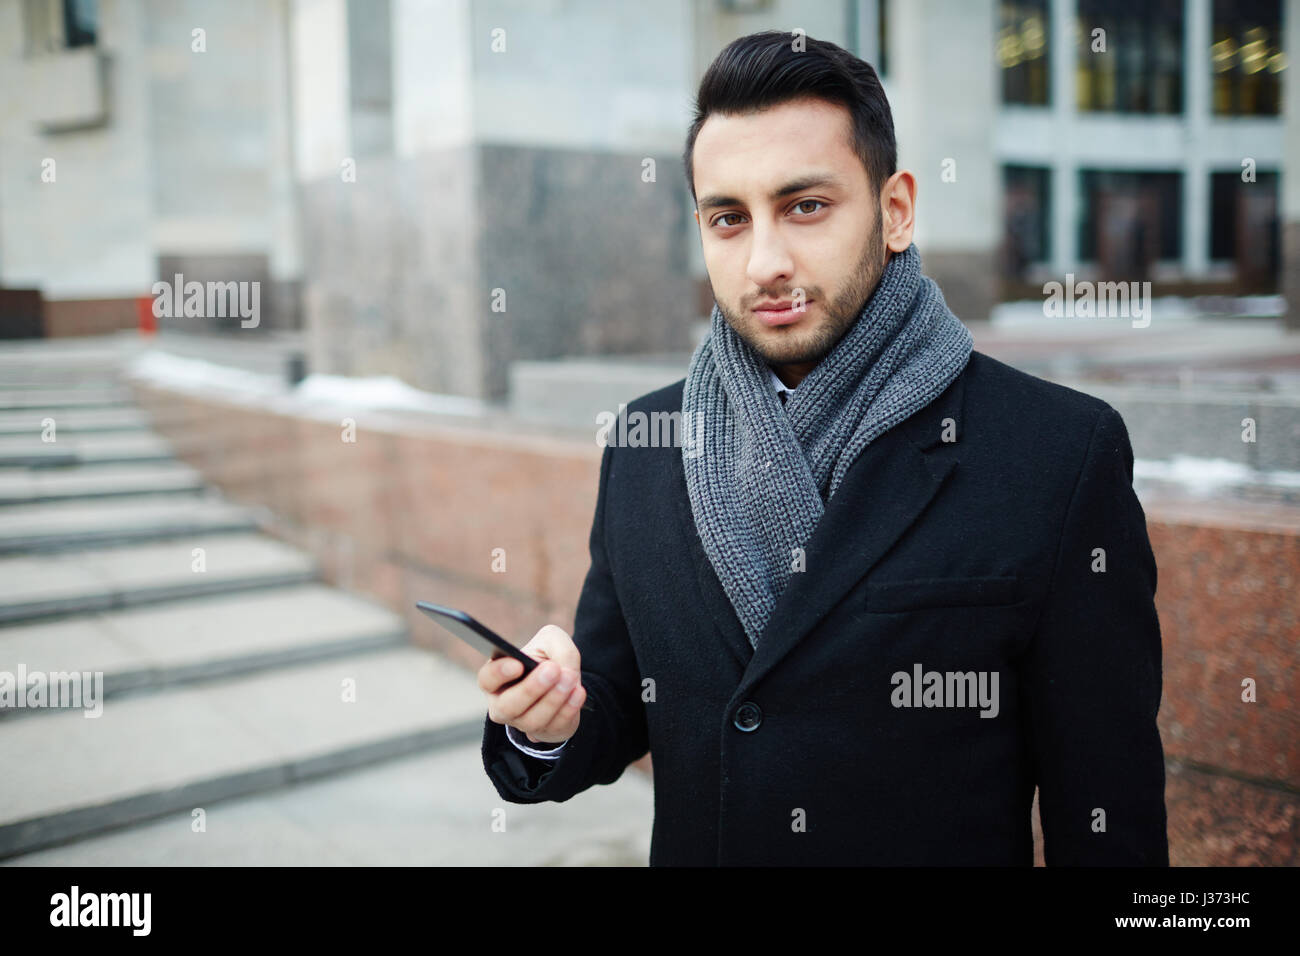 Portrait of Successful Middle-Eastern Businessman Stock Photo